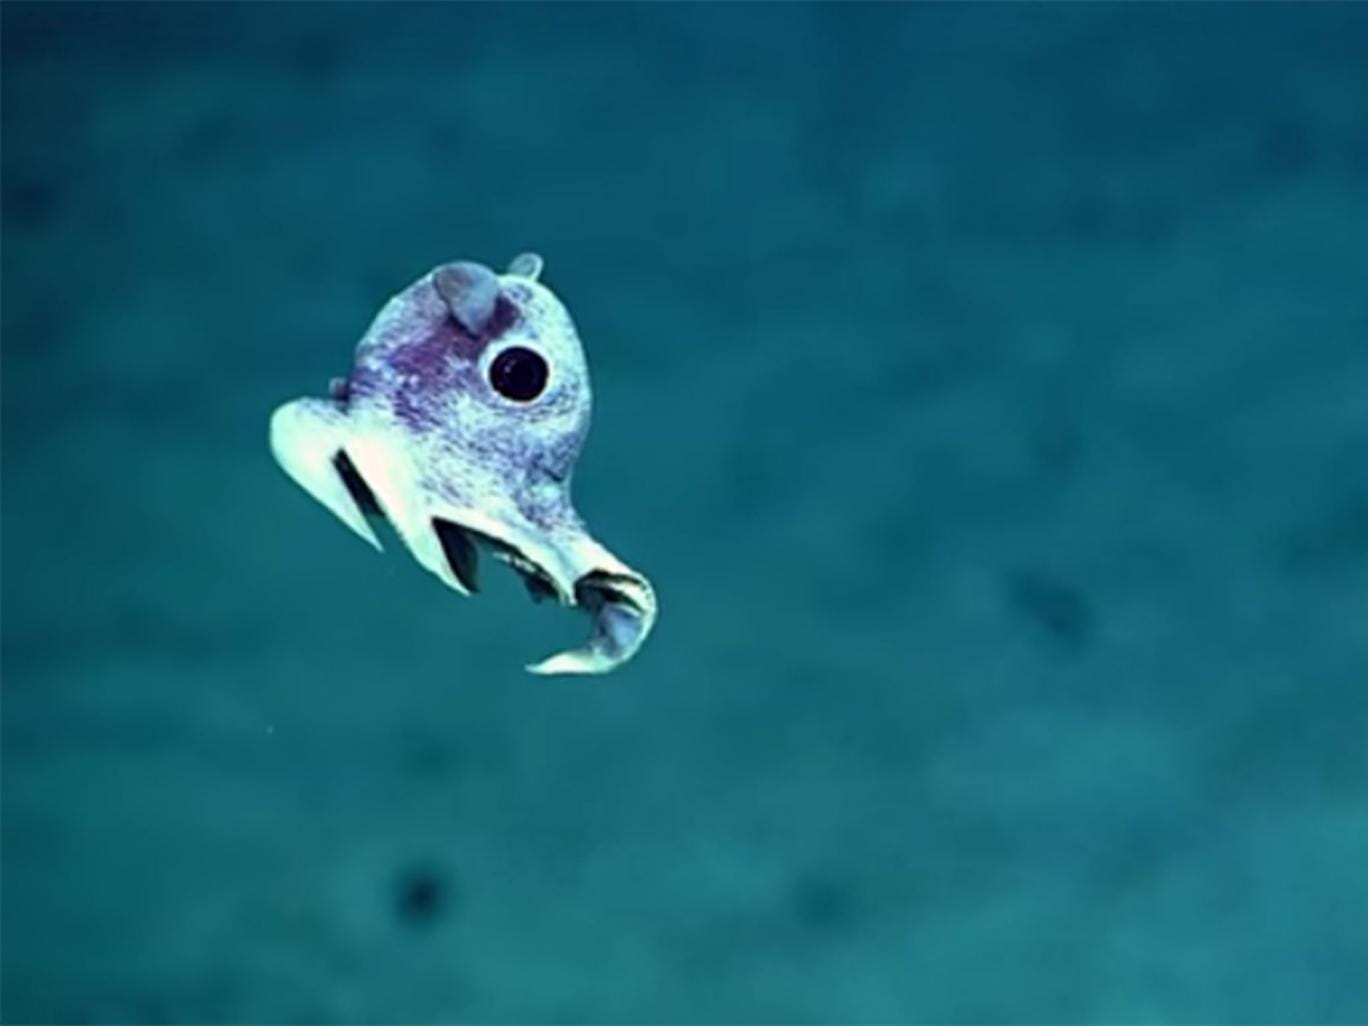 Incredible images of undiscovered deep sea creatures released after